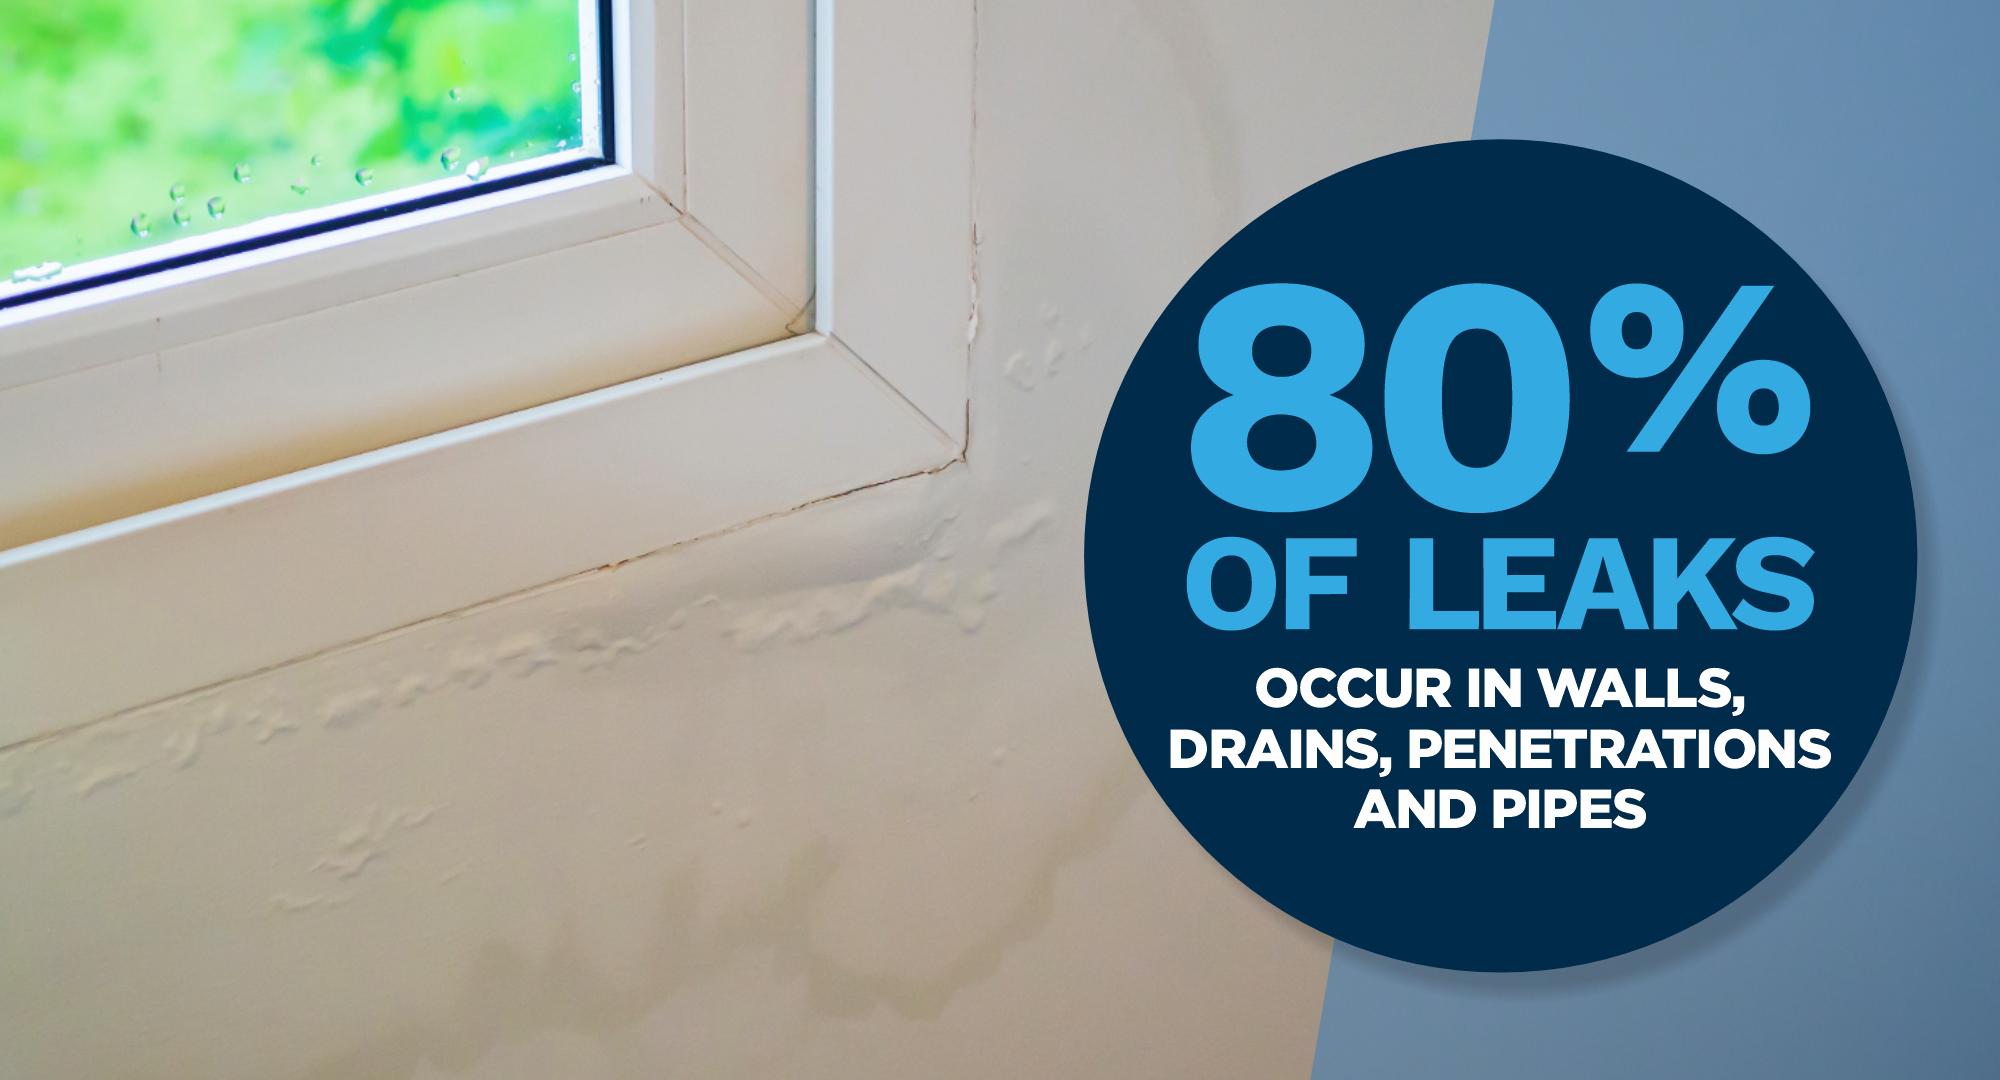 80 percent of leaks occur in walls, drains, penetrations and pipes